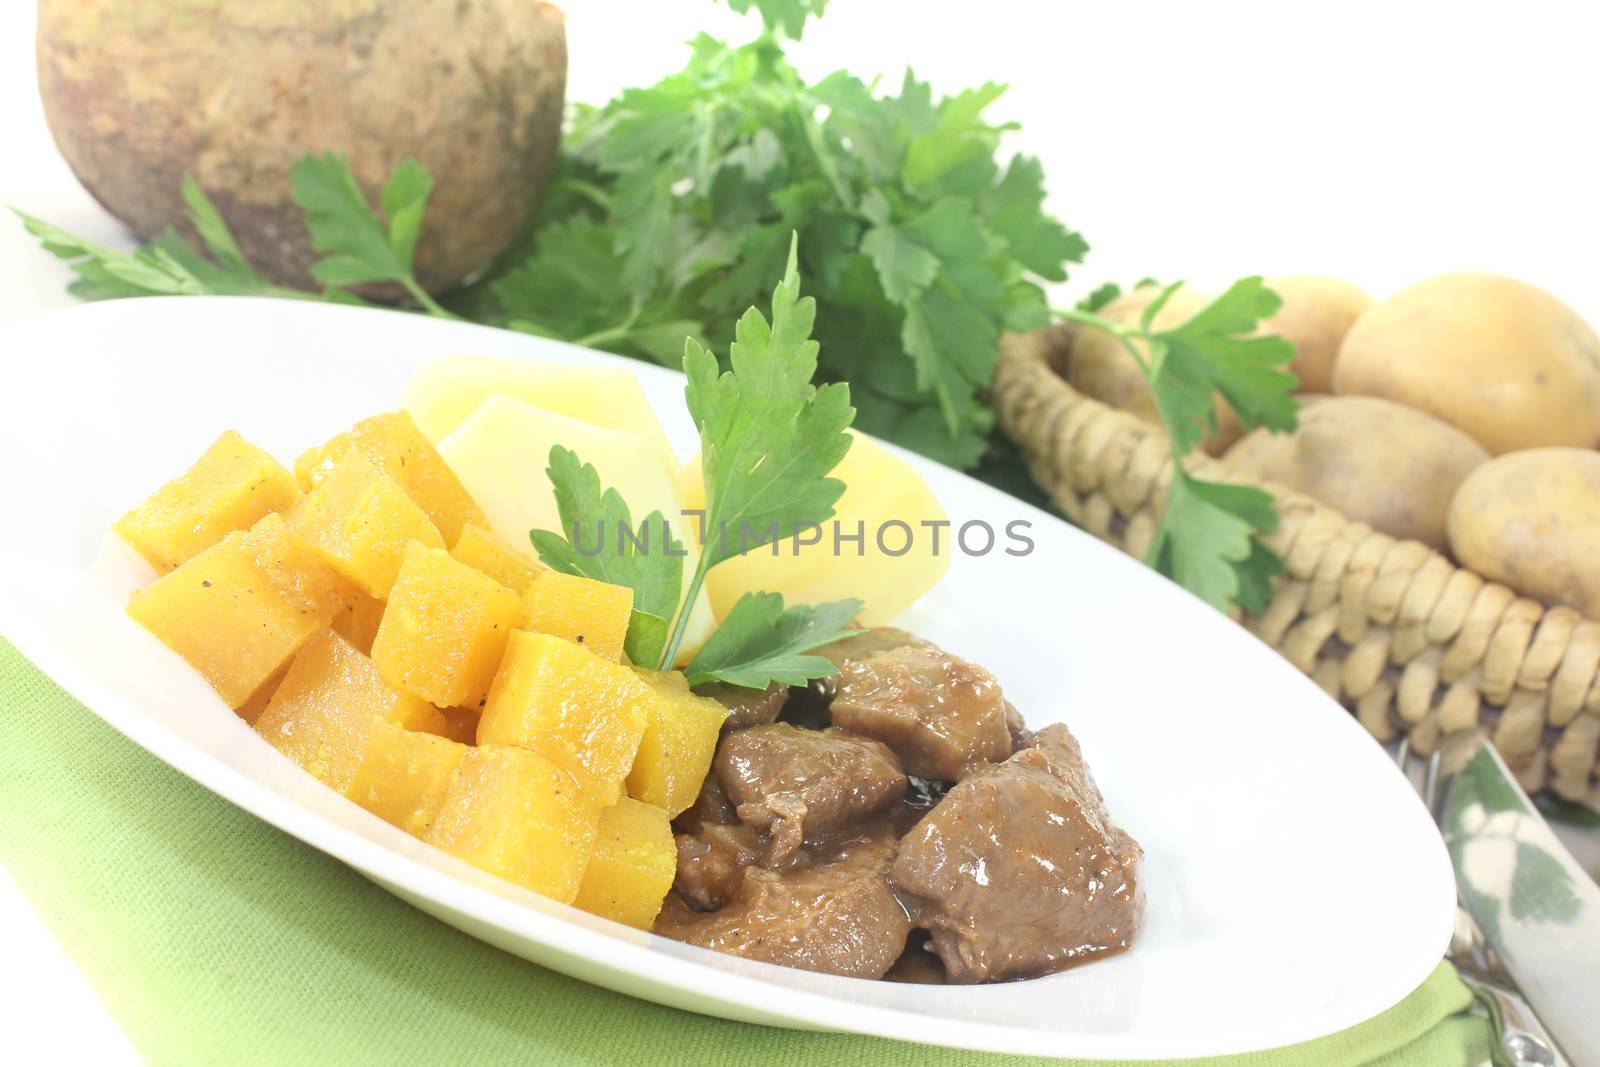 Venison goulash with rutabaga and potatoes by discovery